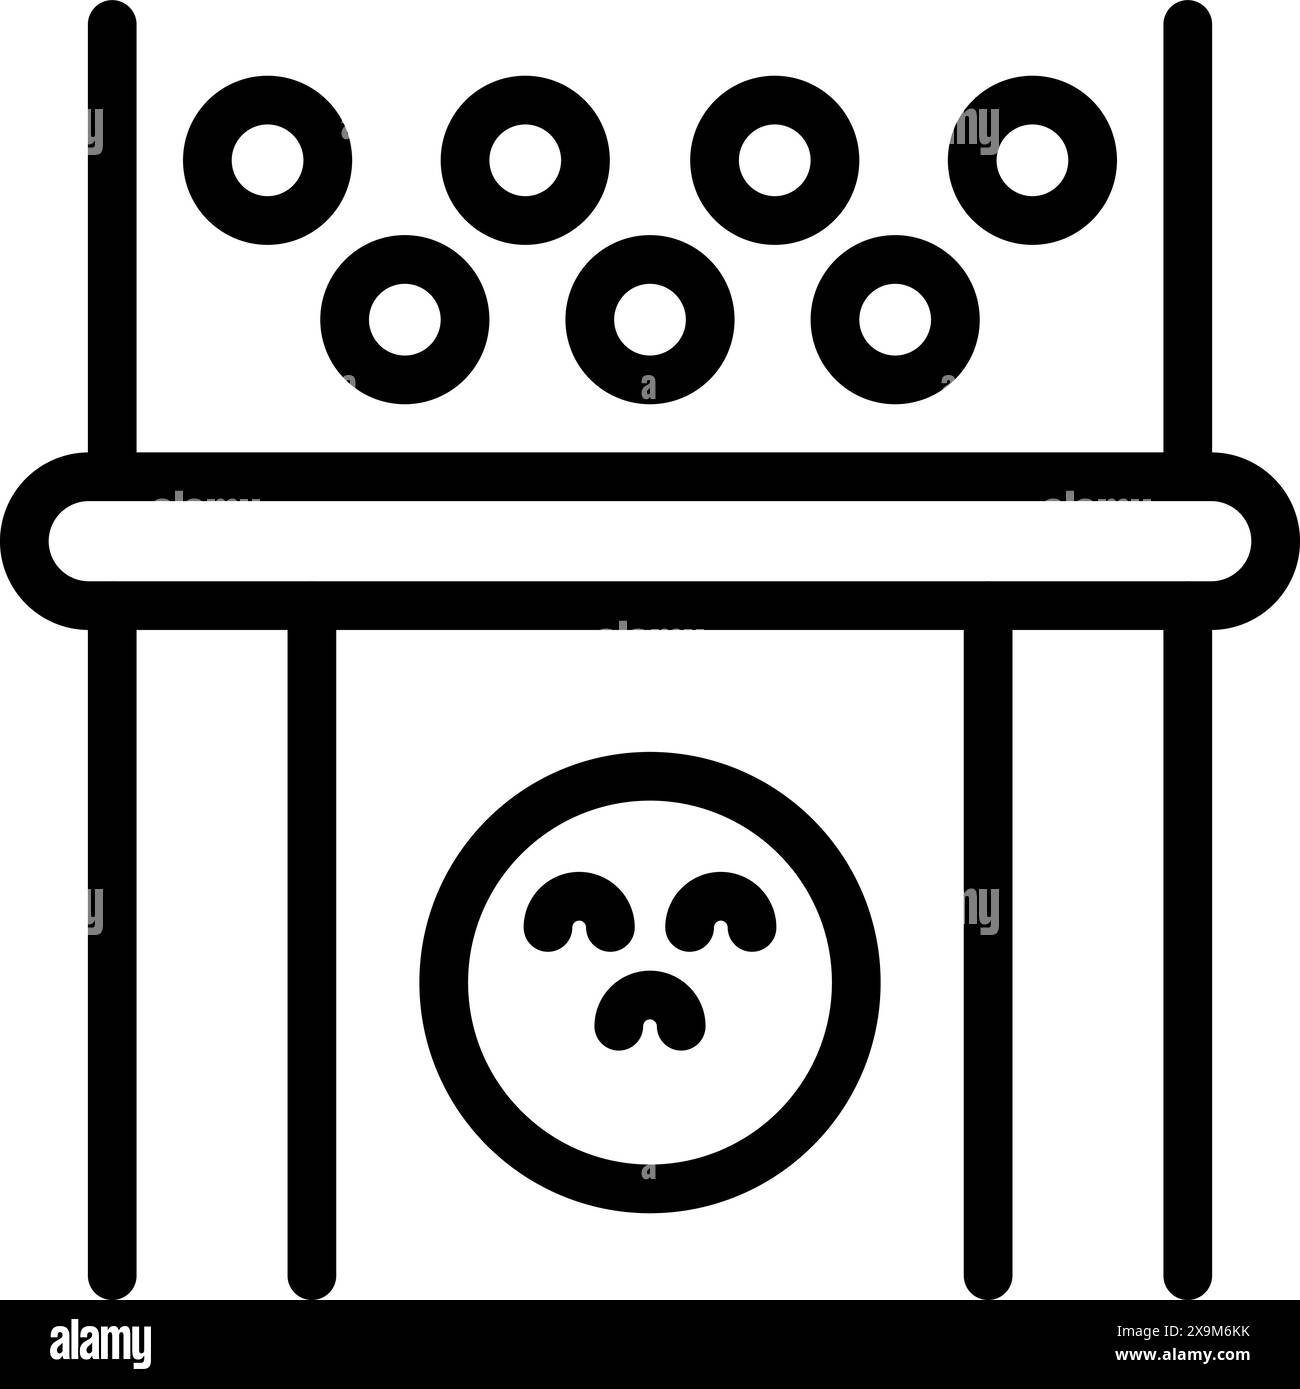 Black line art icon depicting stress with a sad face under a pressure gauge Stock Vector